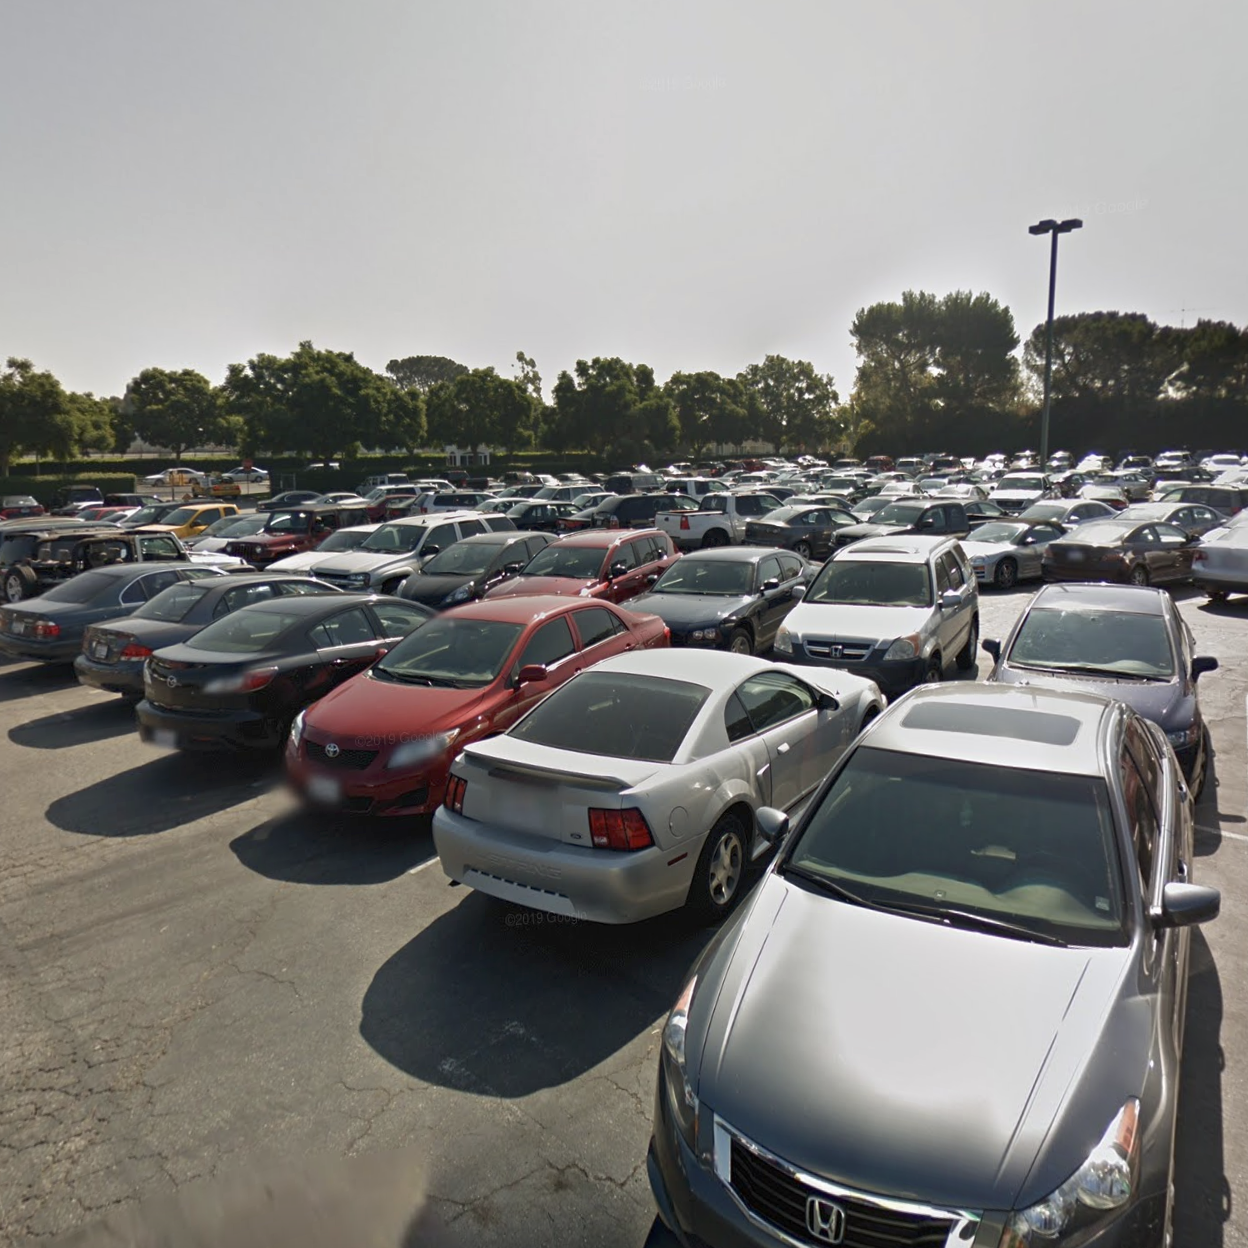 Cars in a parking lot